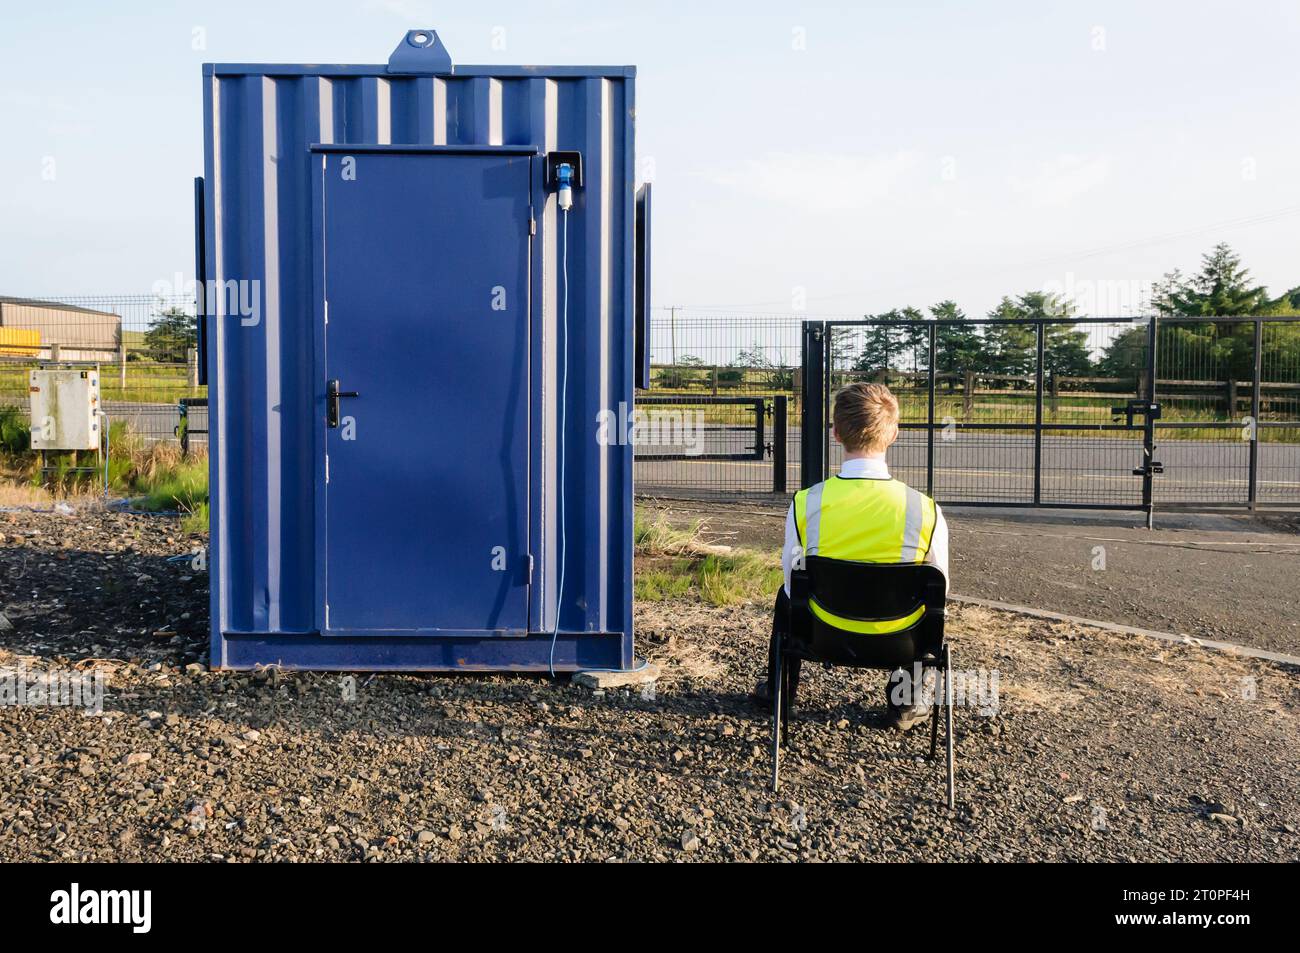 A security guard sits on a chair beside his hut inside a fenced off compound Stock Photo